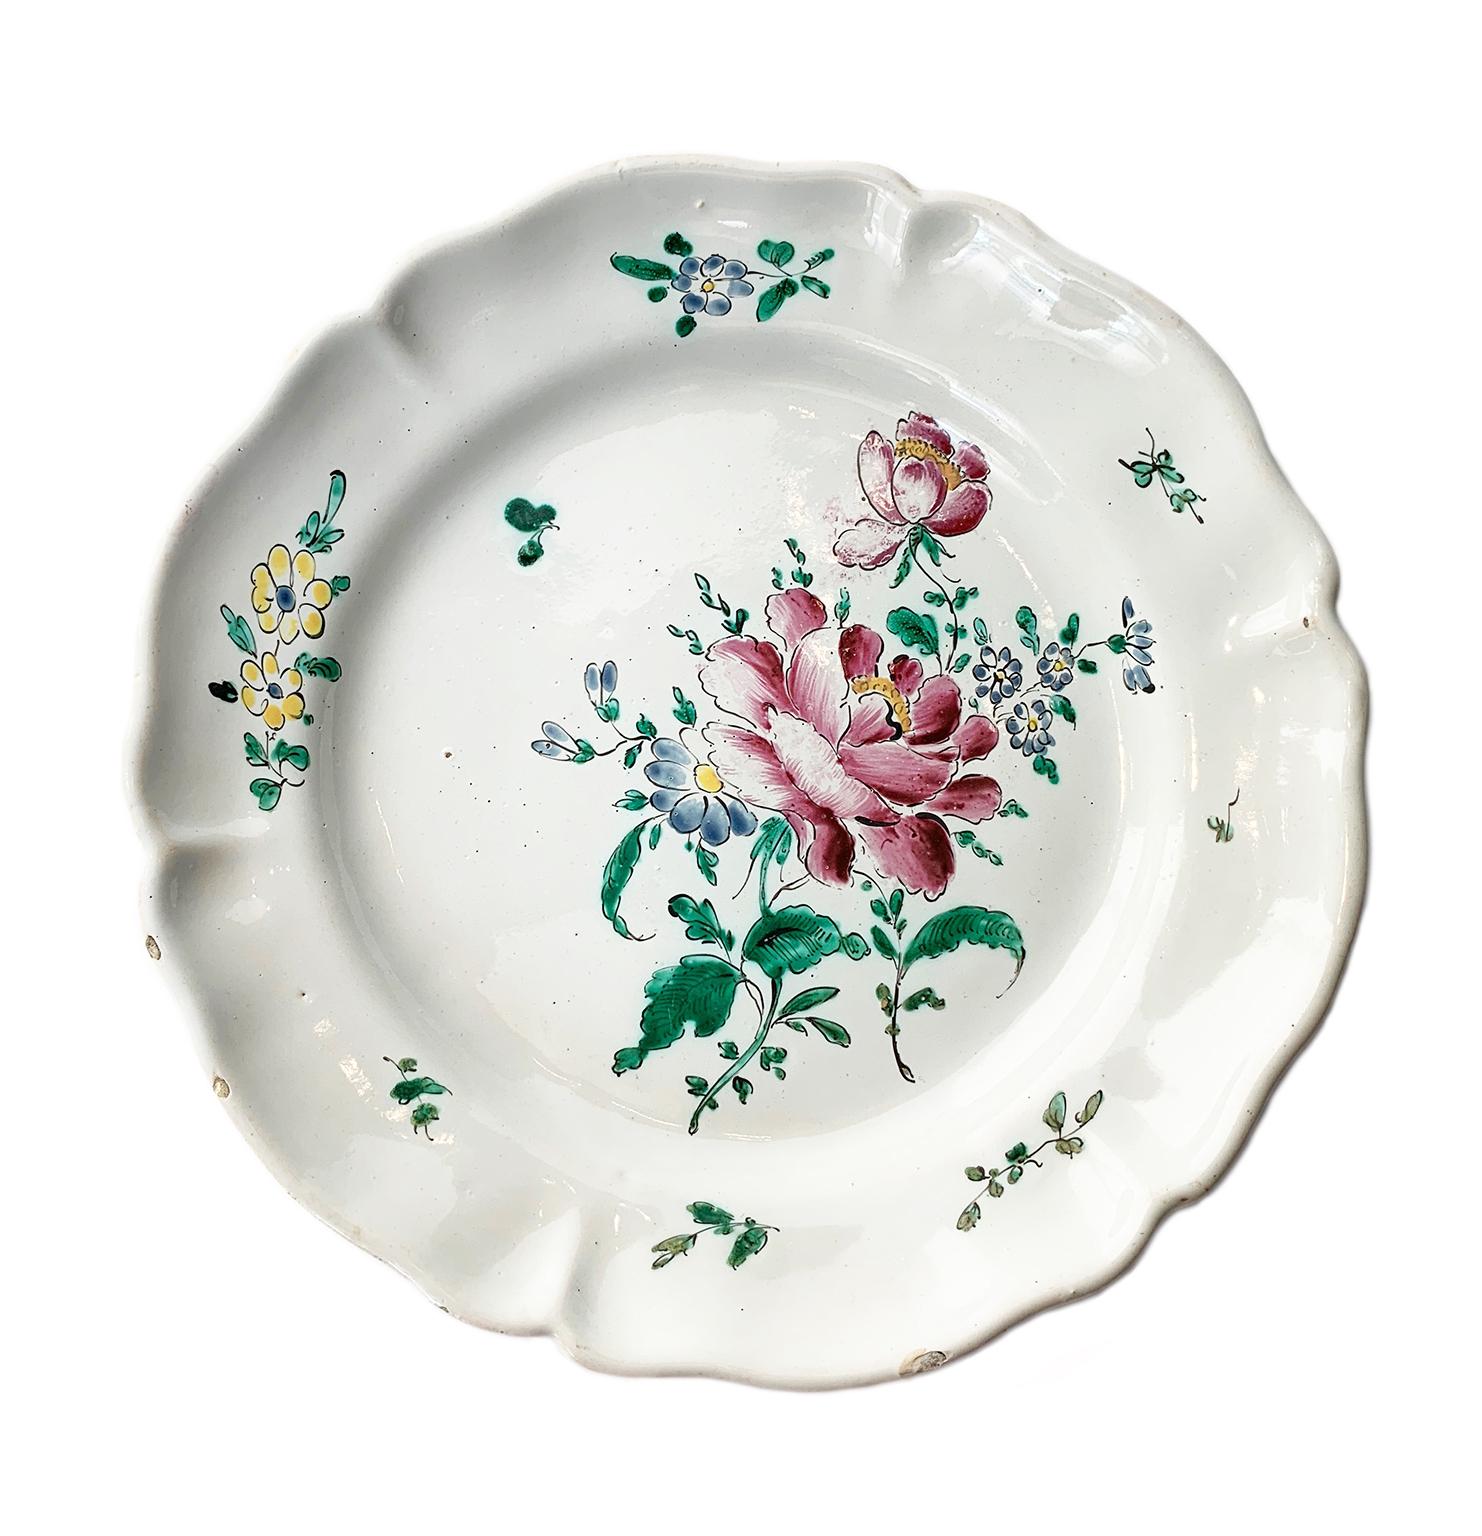 Glazed Ancient Maiolica Dishes with flowers, Lombard Manufacture, 1770-1780 Circa For Sale